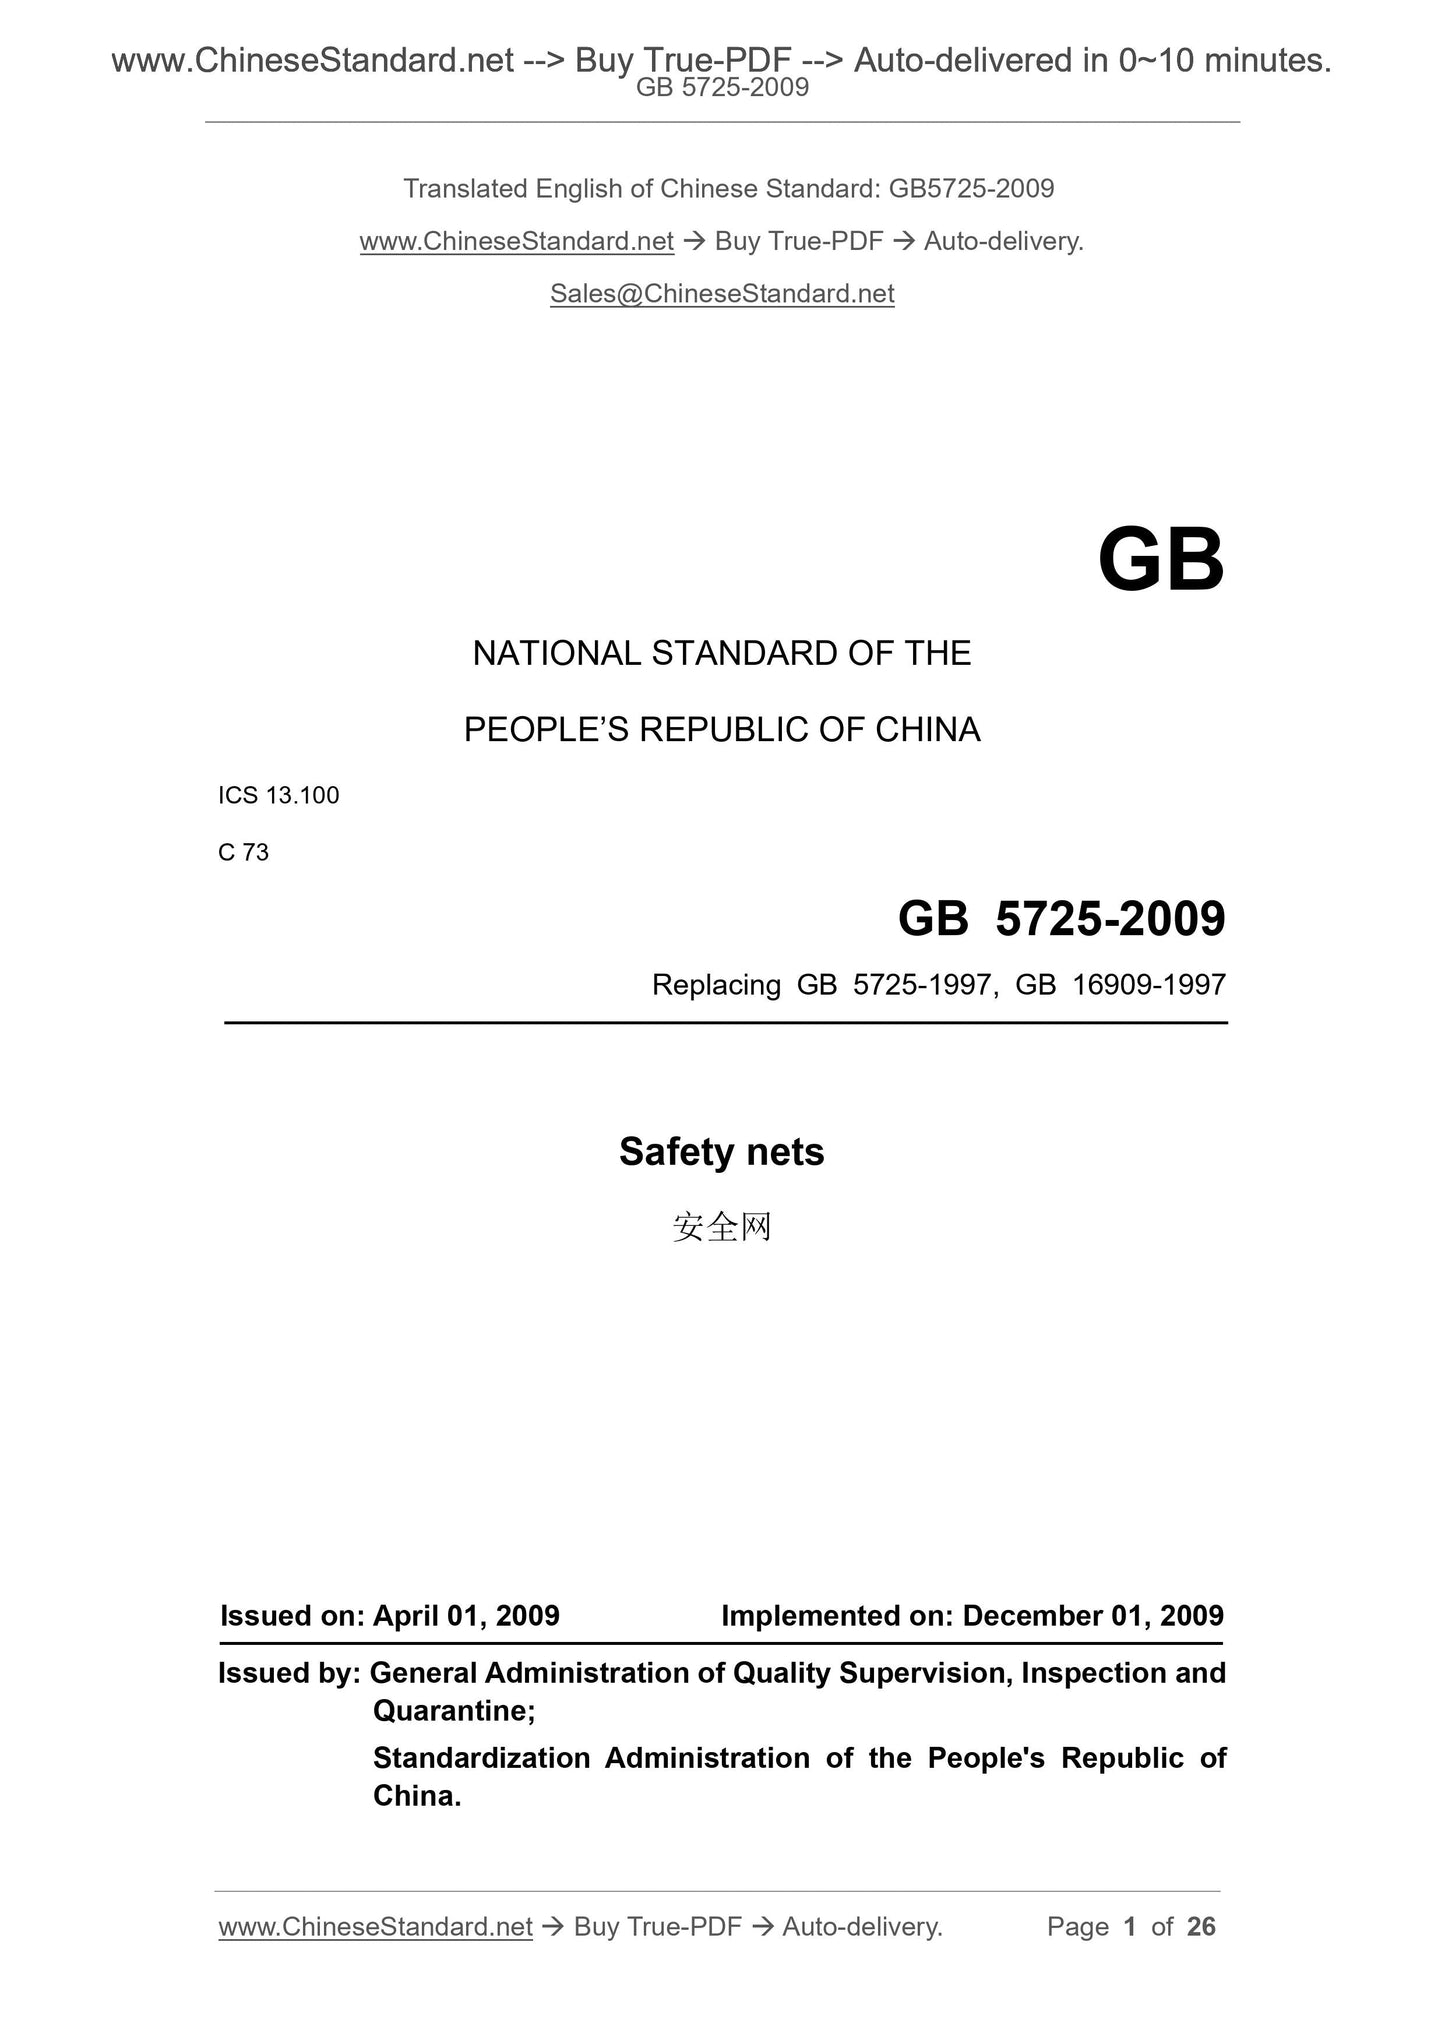 GB 5725-2009 Page 1